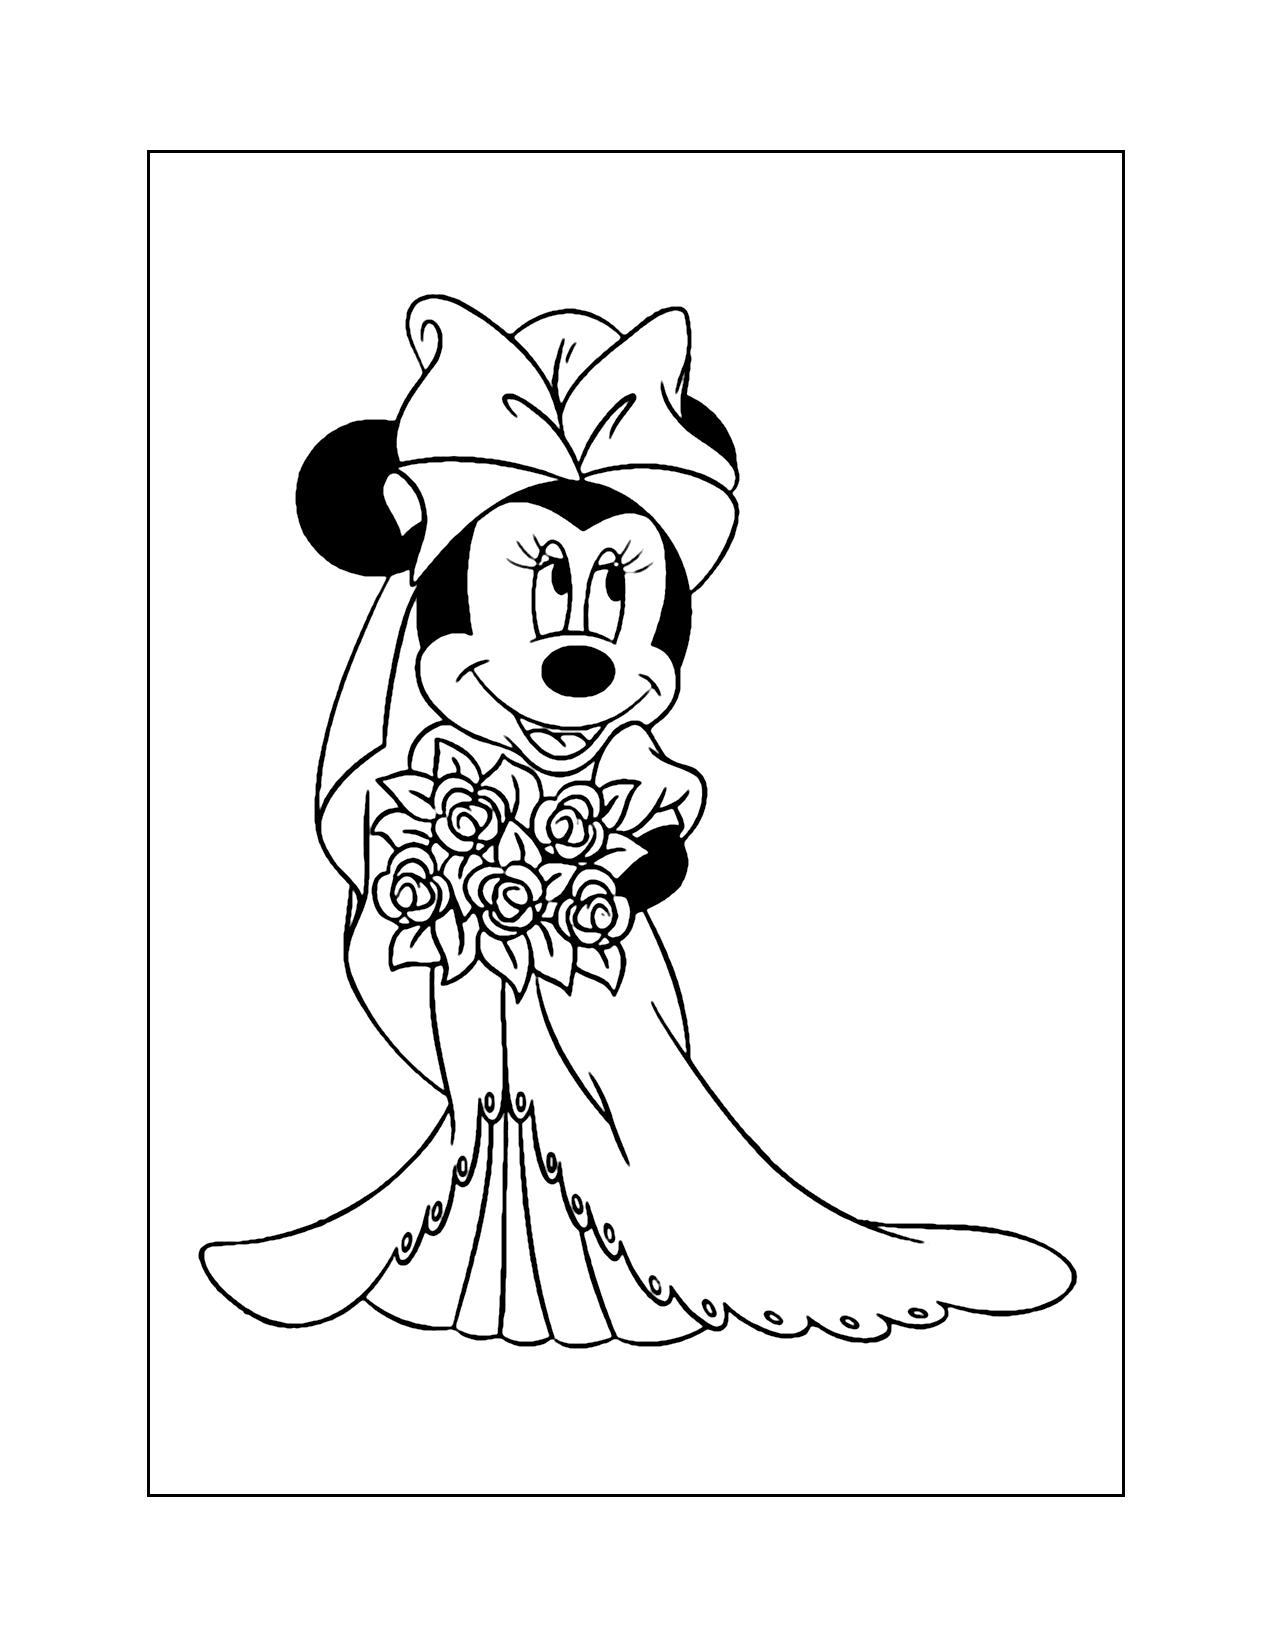 Minnie Mouse Wedding Bride Coloring Page